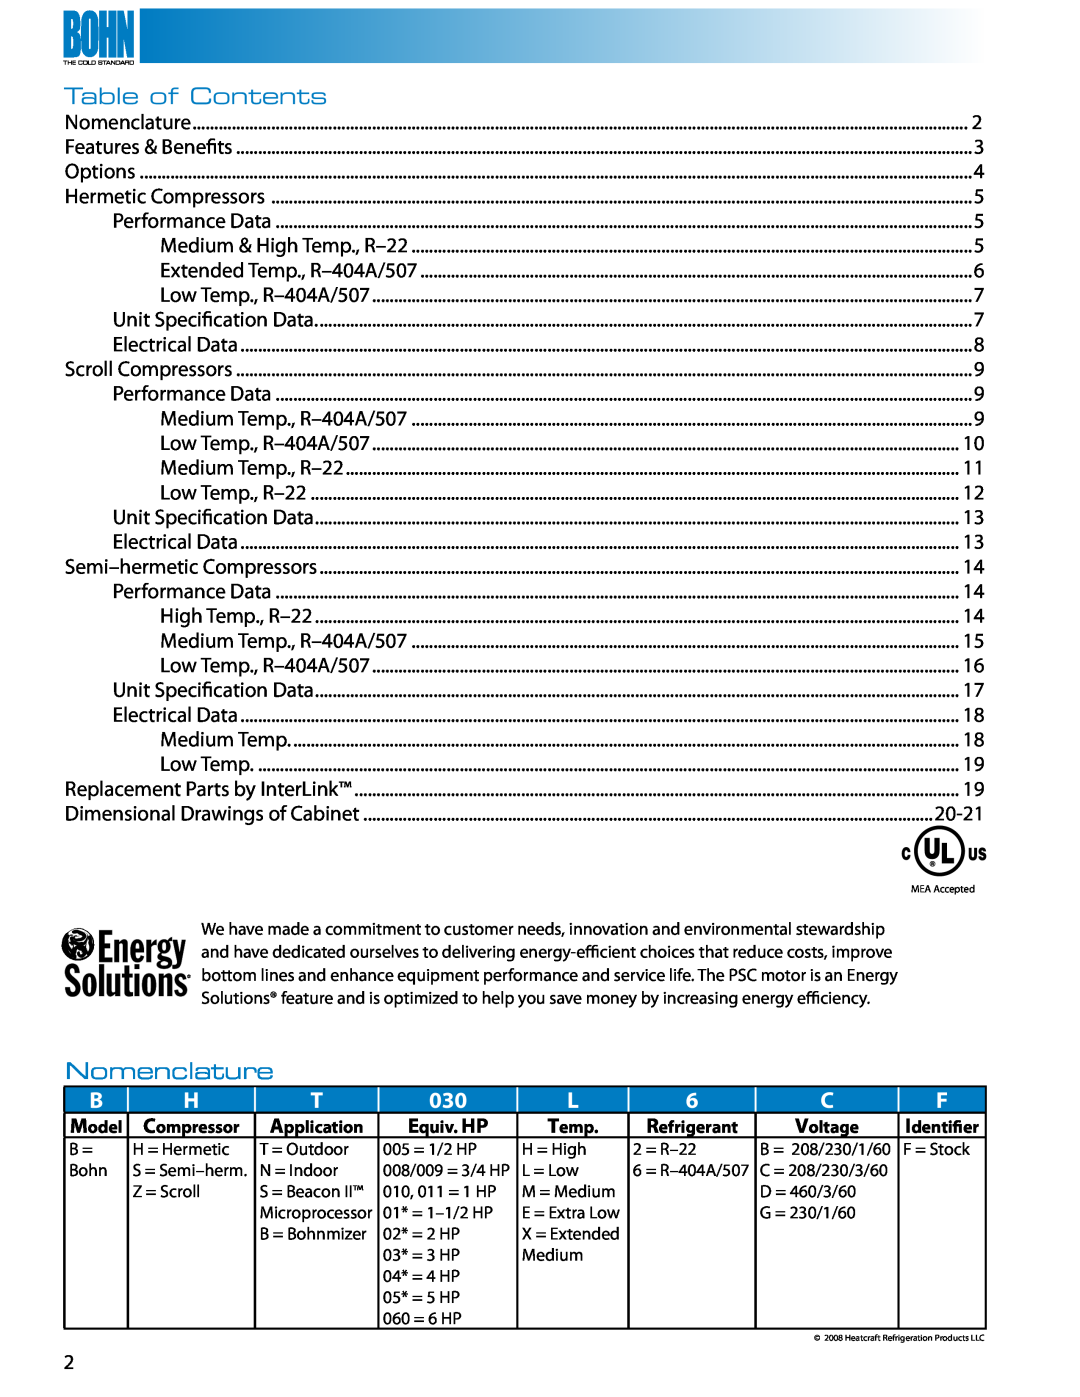 Heatcraft Refrigeration Products Air-Cooled Condensing Units manual Table of Contents, Nomenclature 